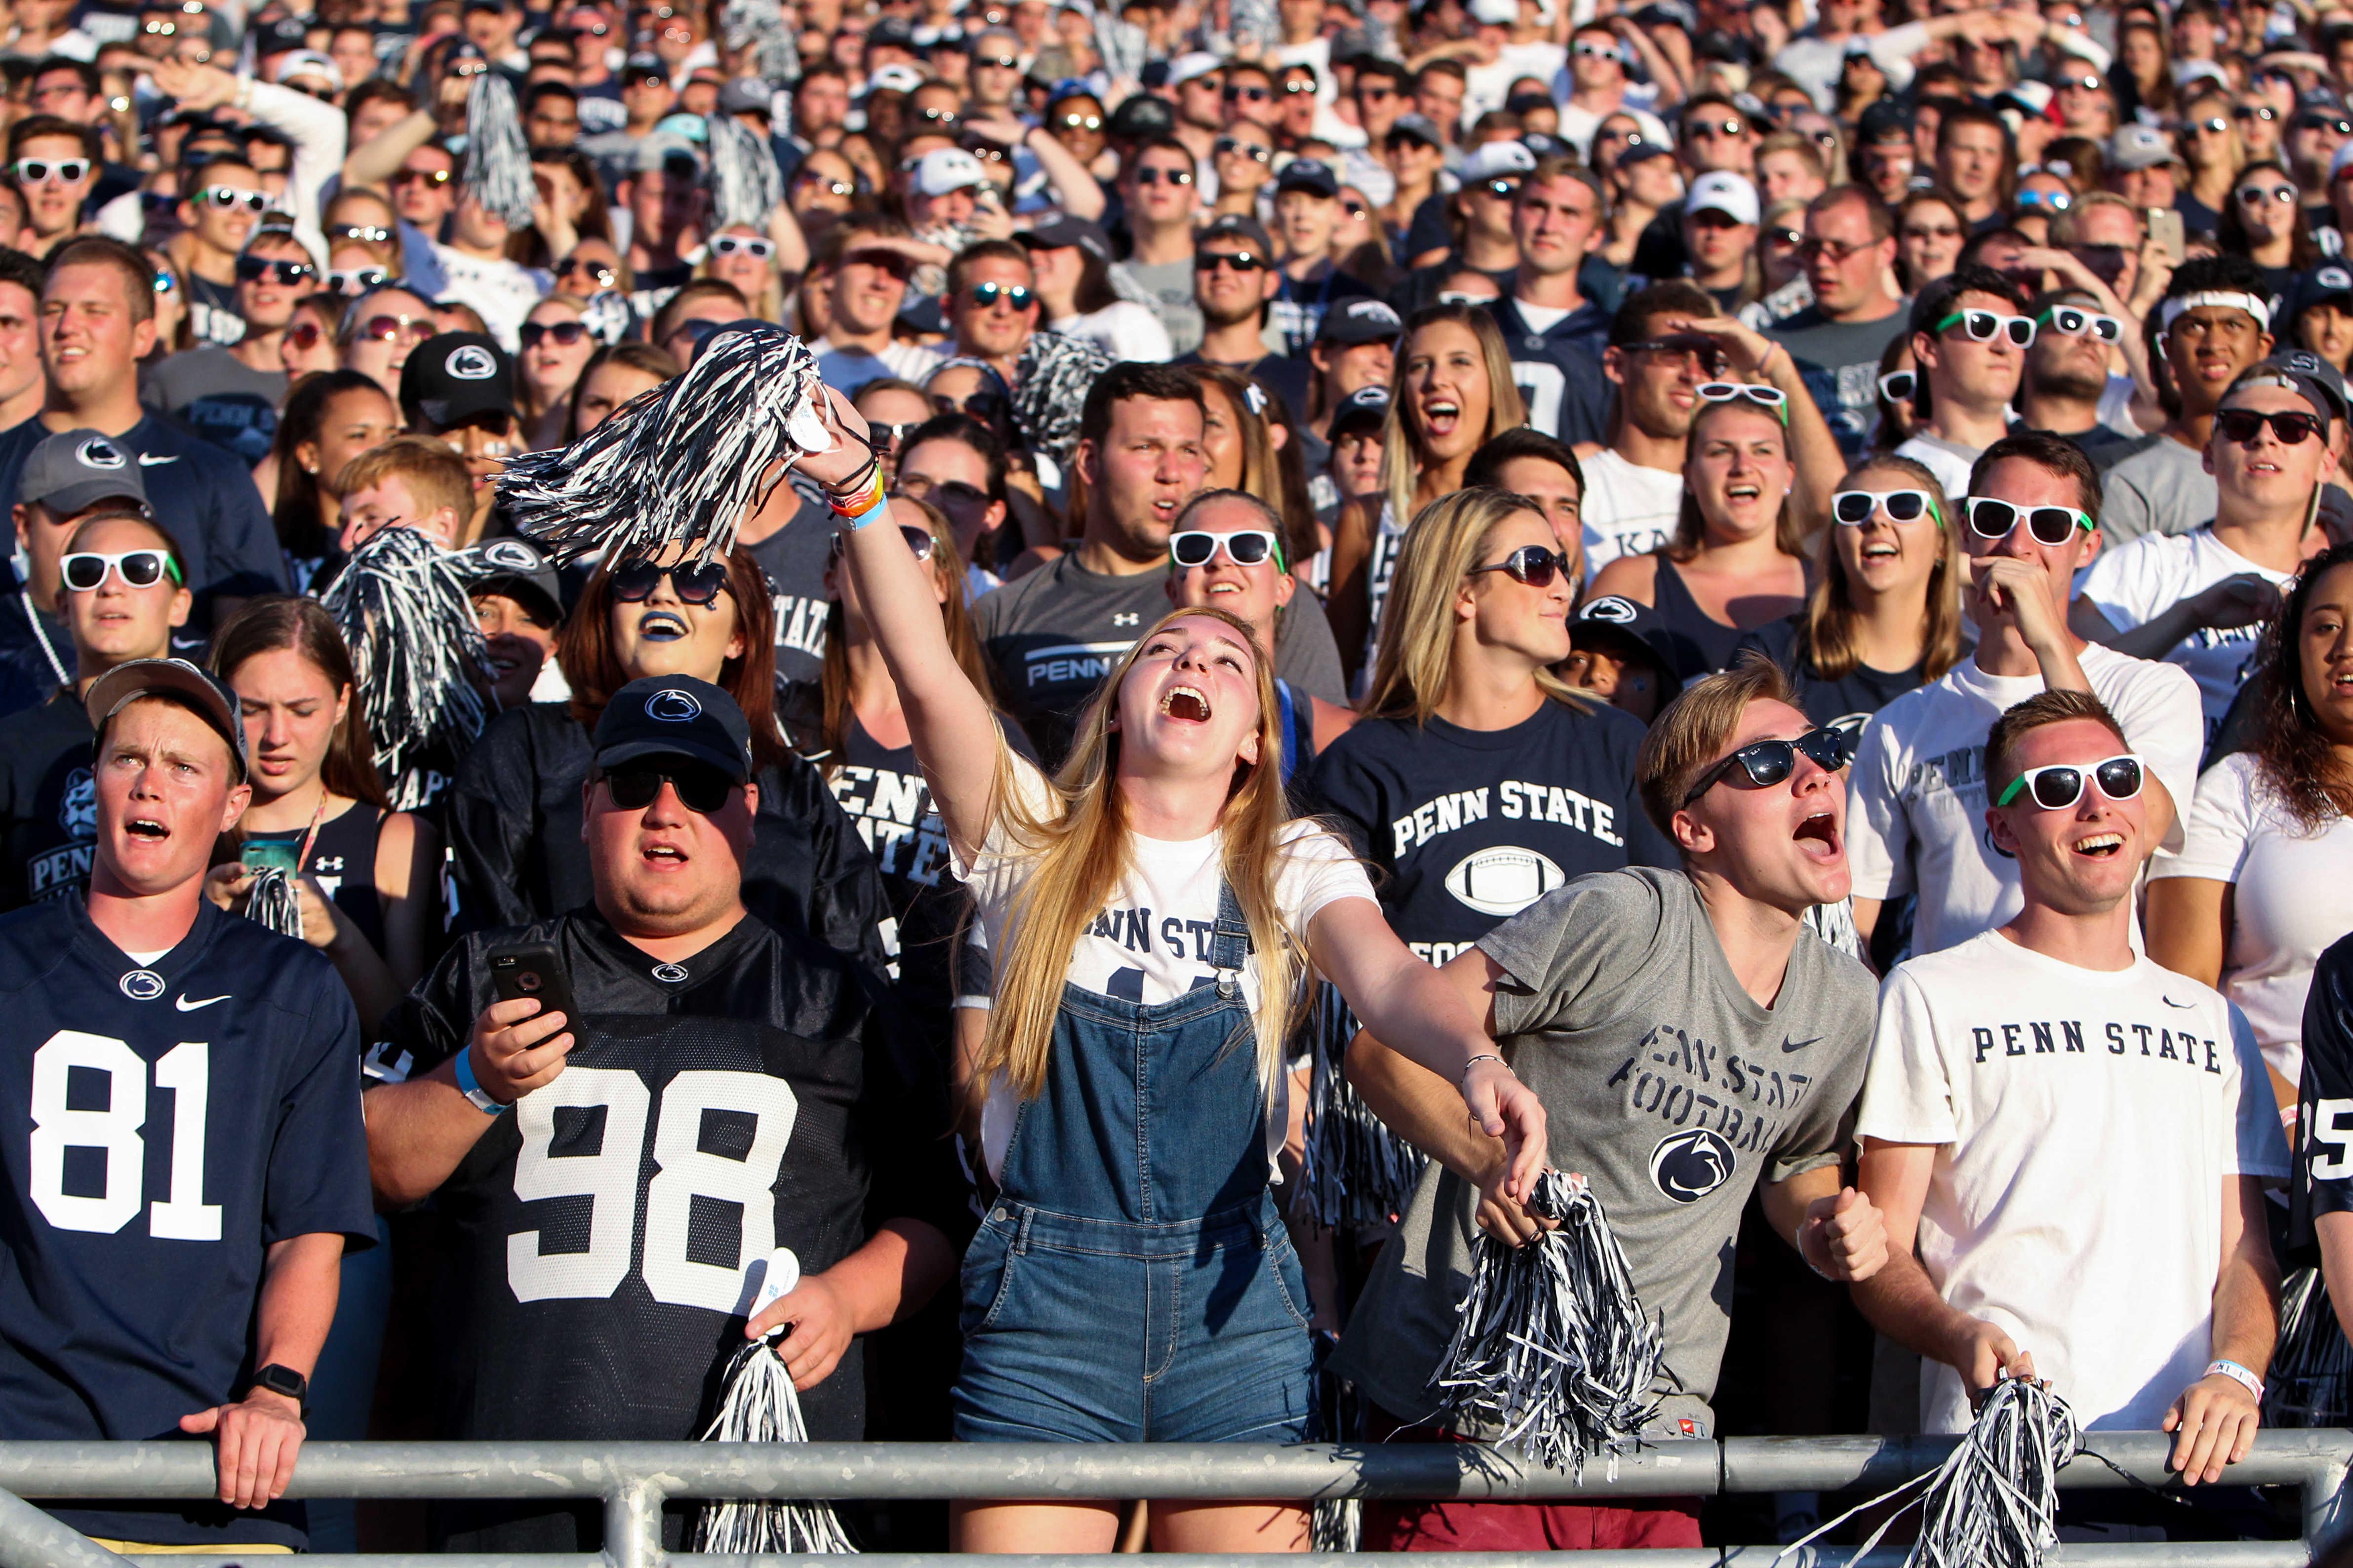 Penn State’s game against Pitt to be televised on ESPN. 